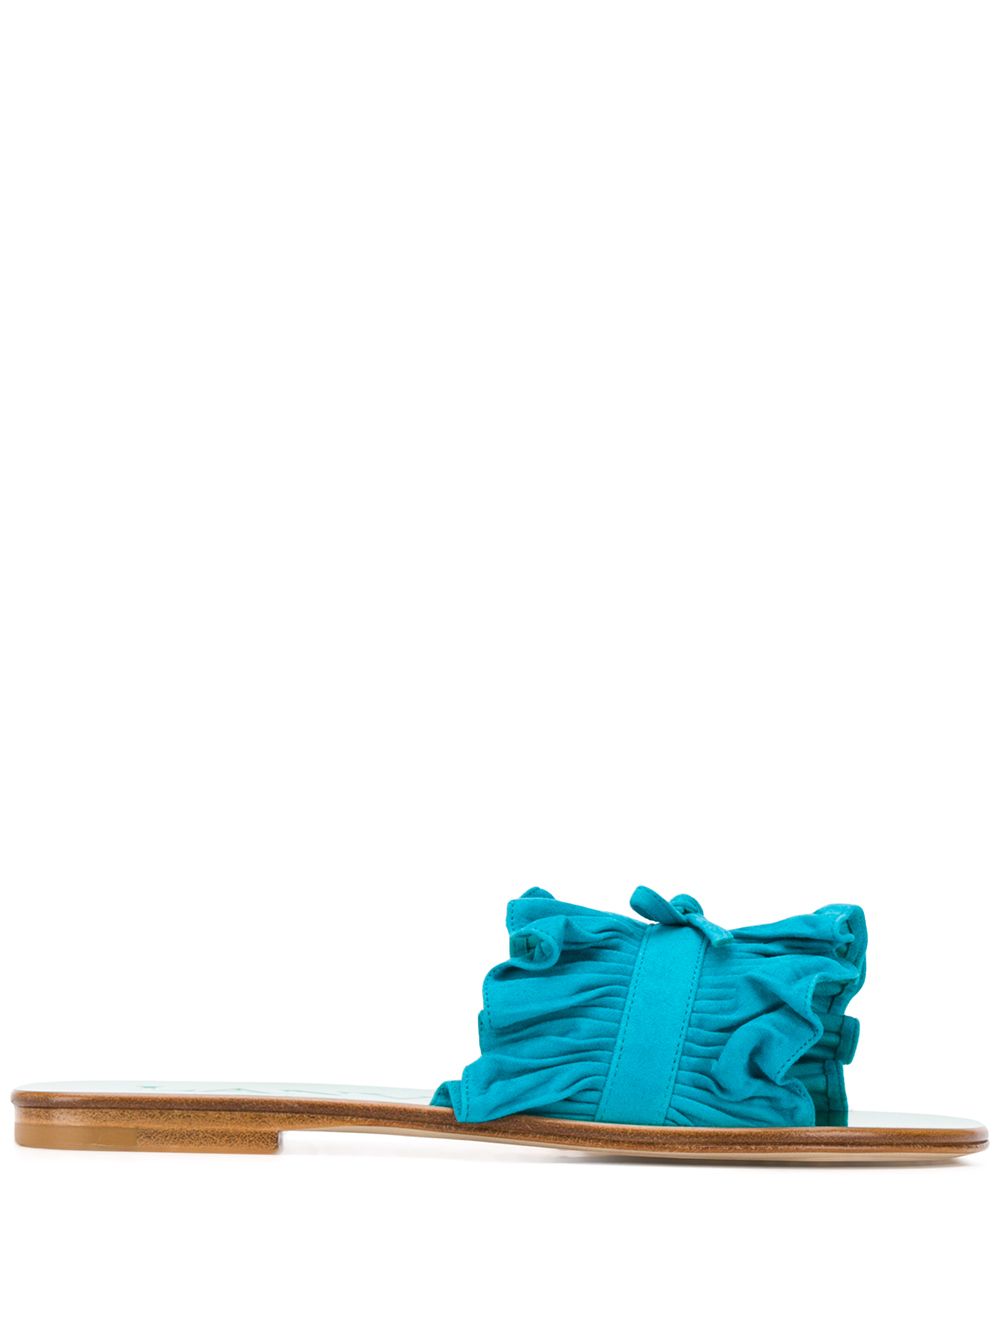 Lanvin Two-tone Bow Embellished Sandals In Green/blue